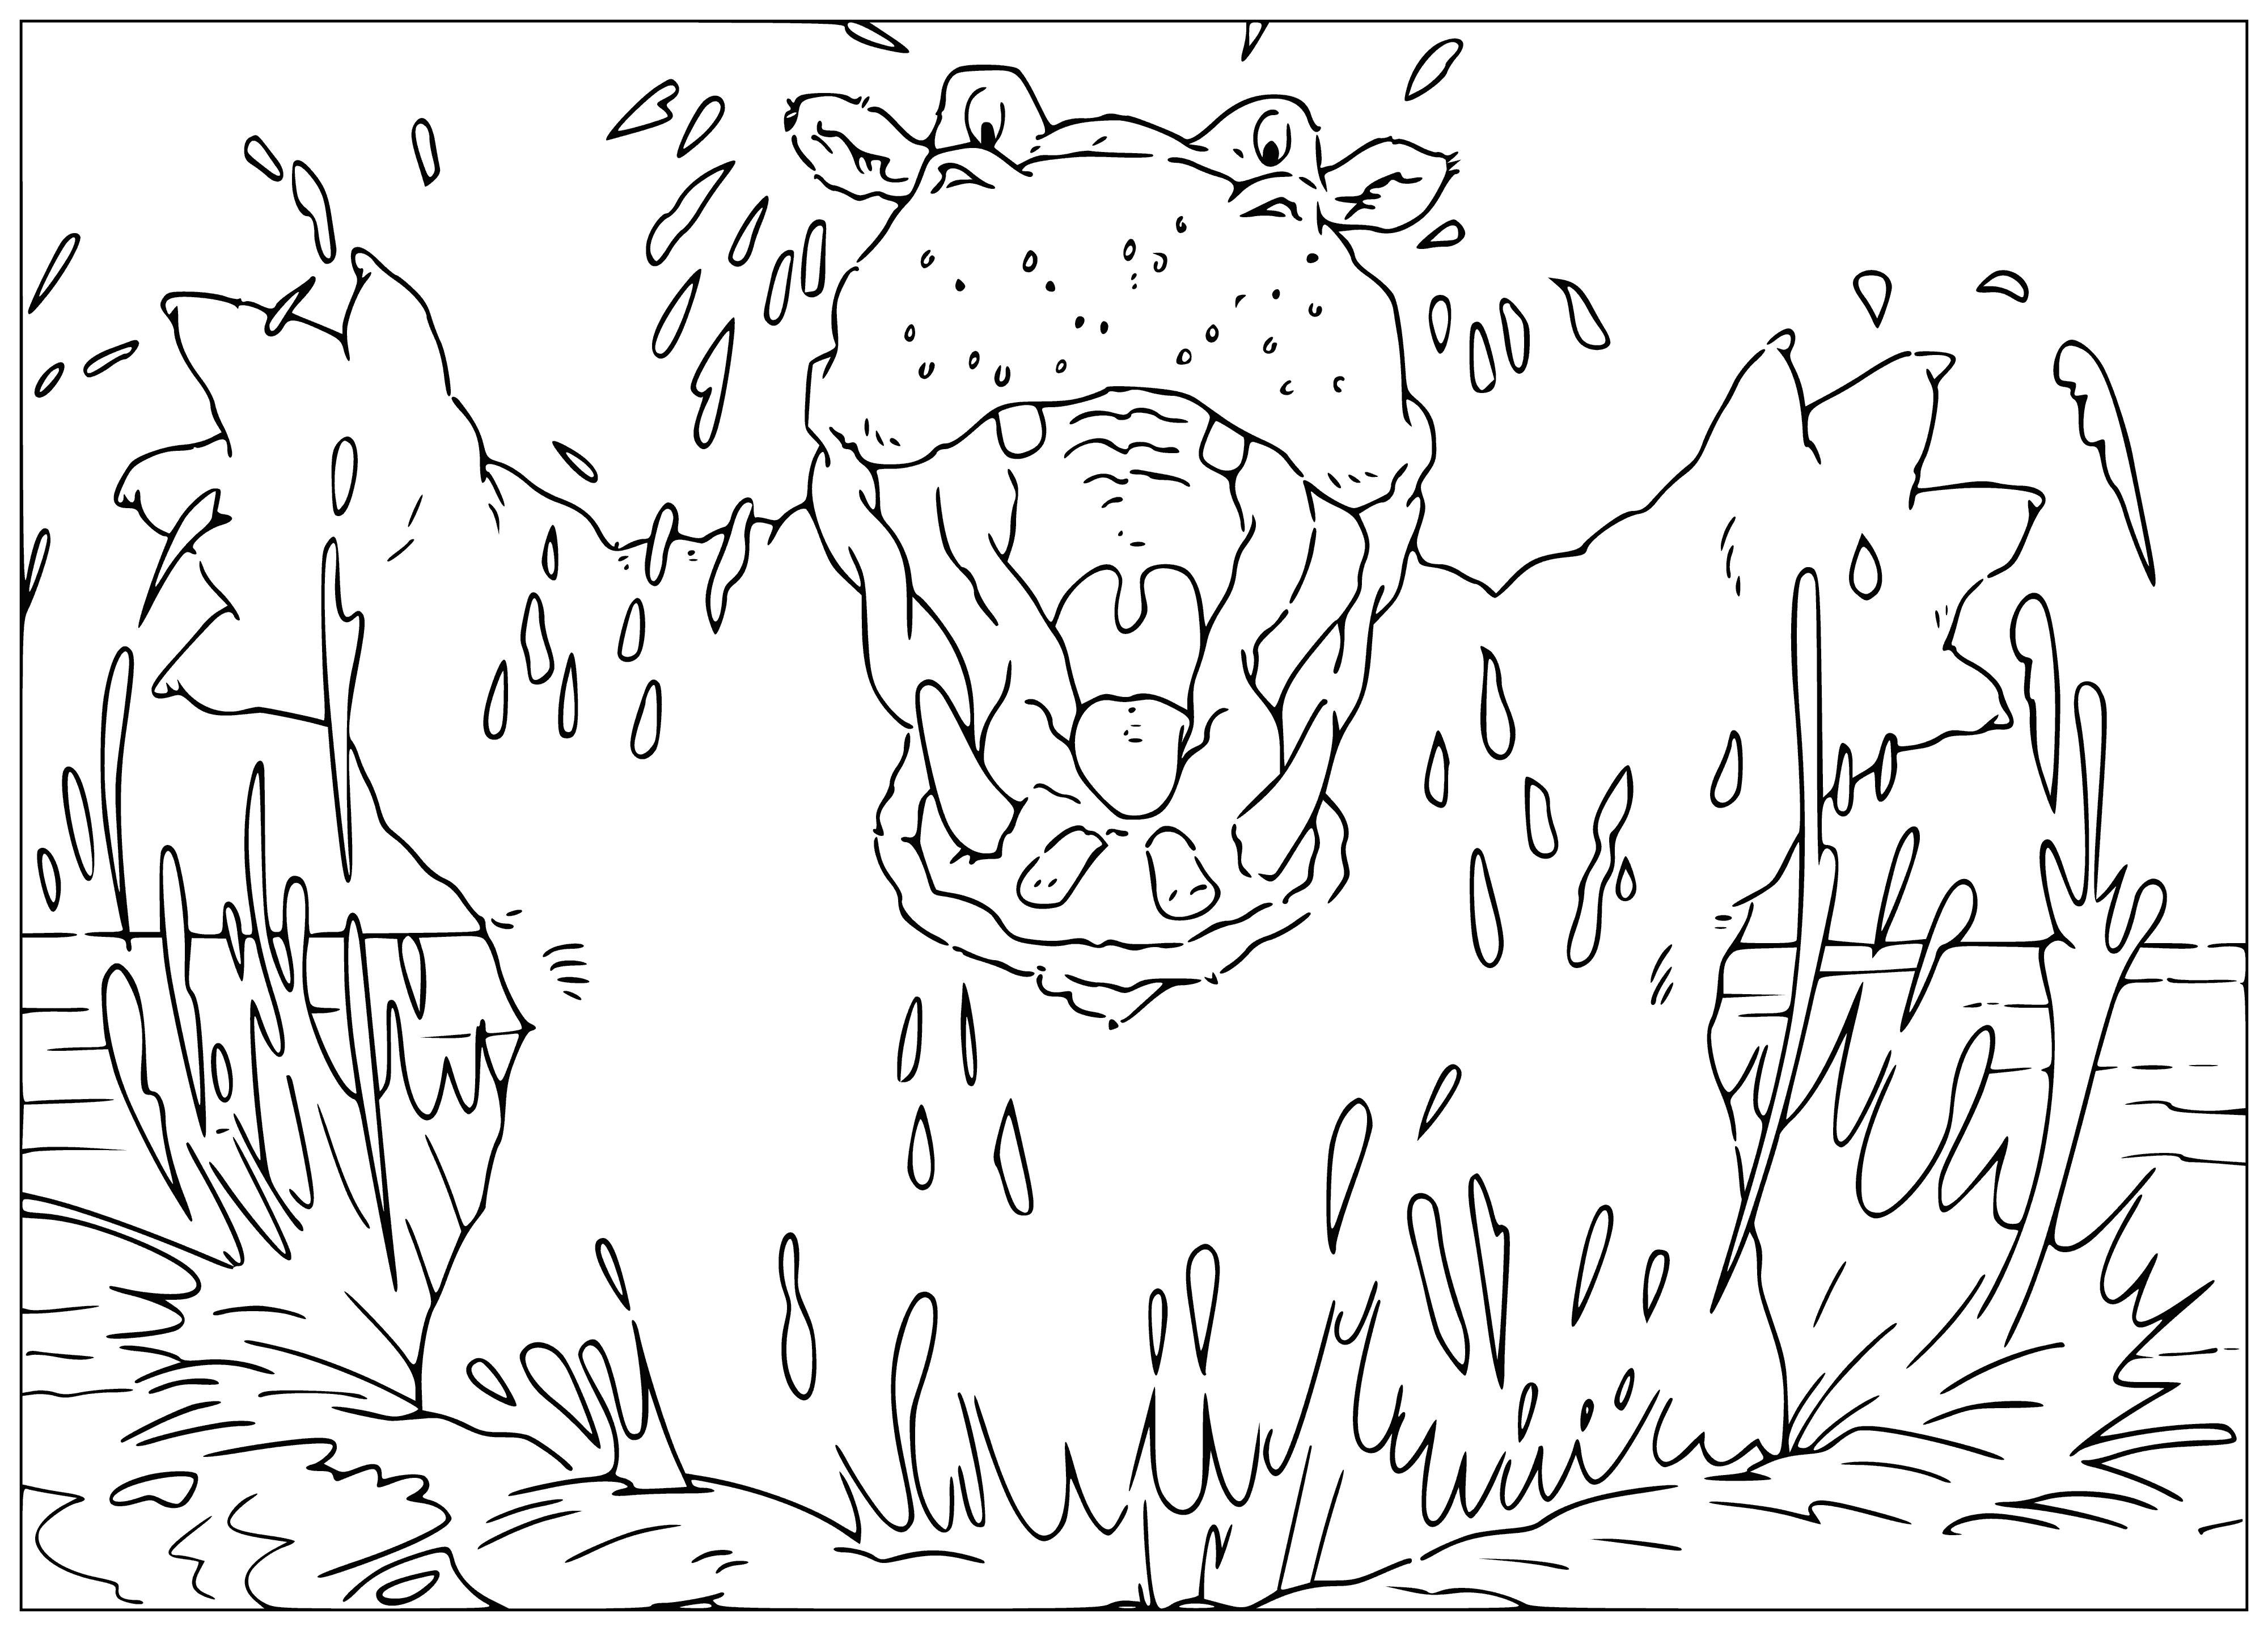 coloring page: Small white polar bear looks scared at huge hippo w/ mouth open showing teeth.